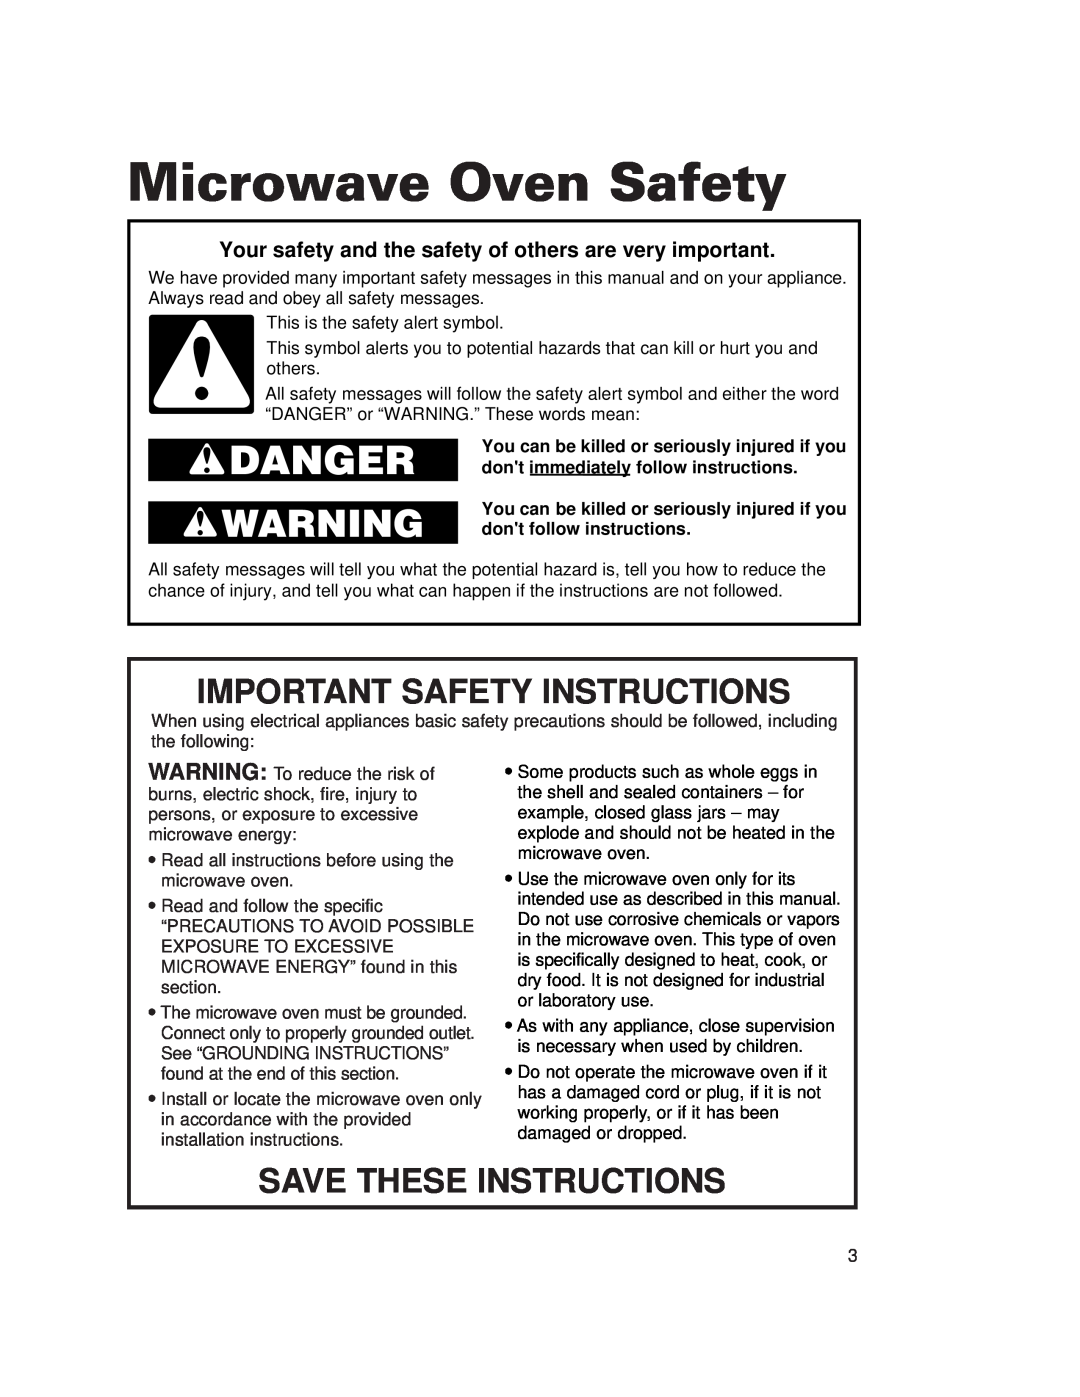 Whirlpool GH7155XKQ warranty Microwave Oven Safety, Important Safety Instructions, Save These Instructions 